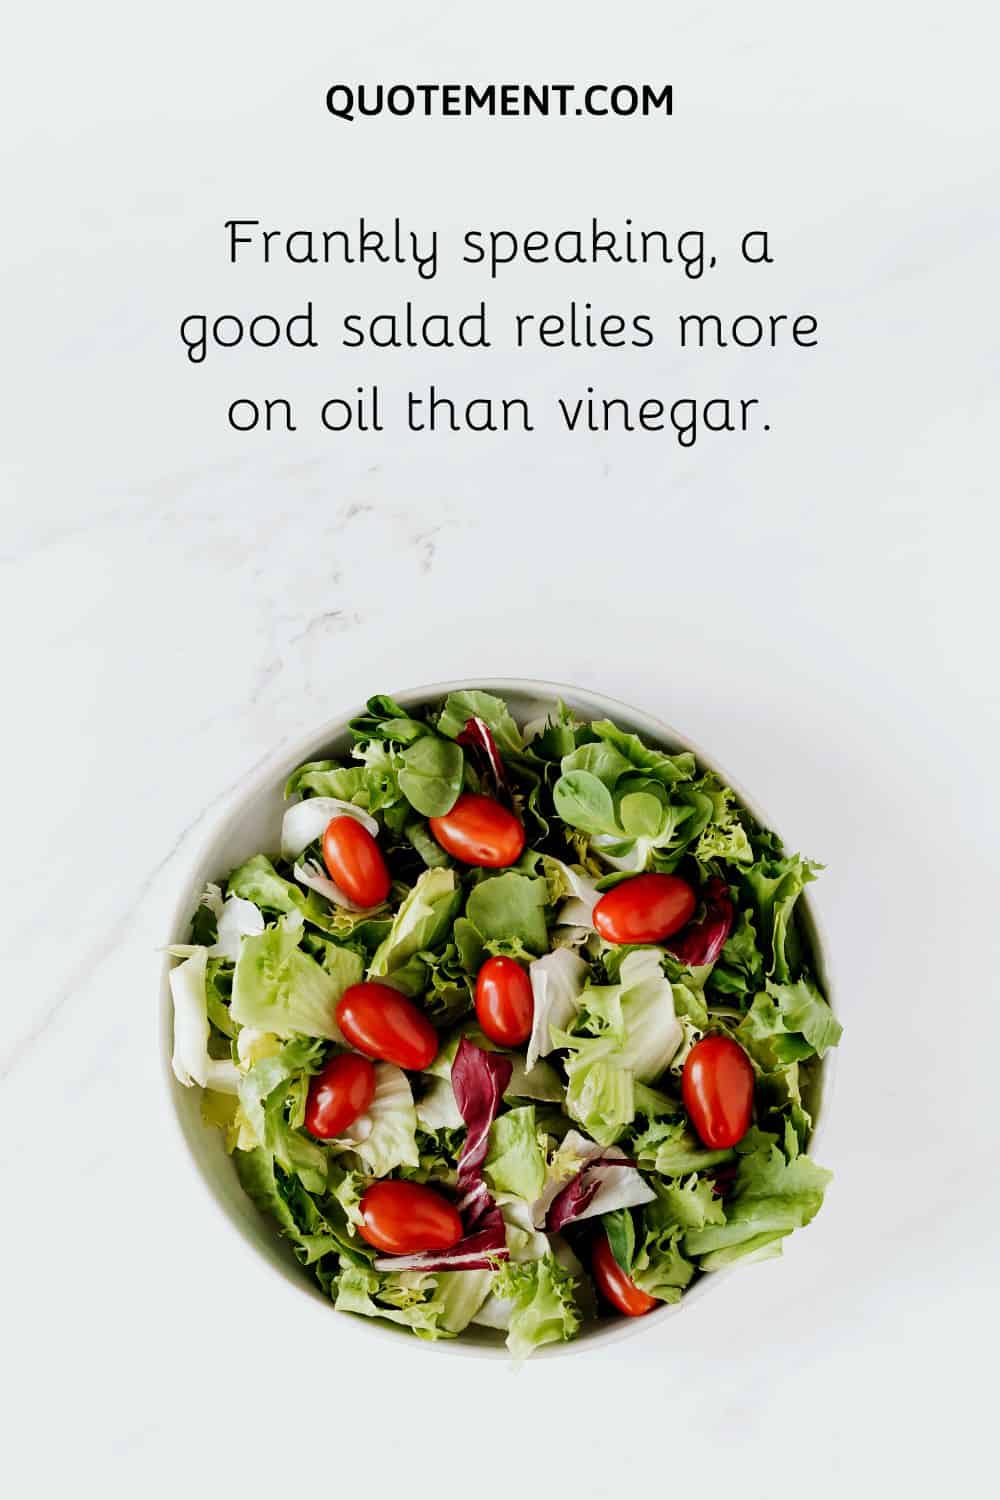 Frankly speaking, a good salad relies more on oil than vinegar